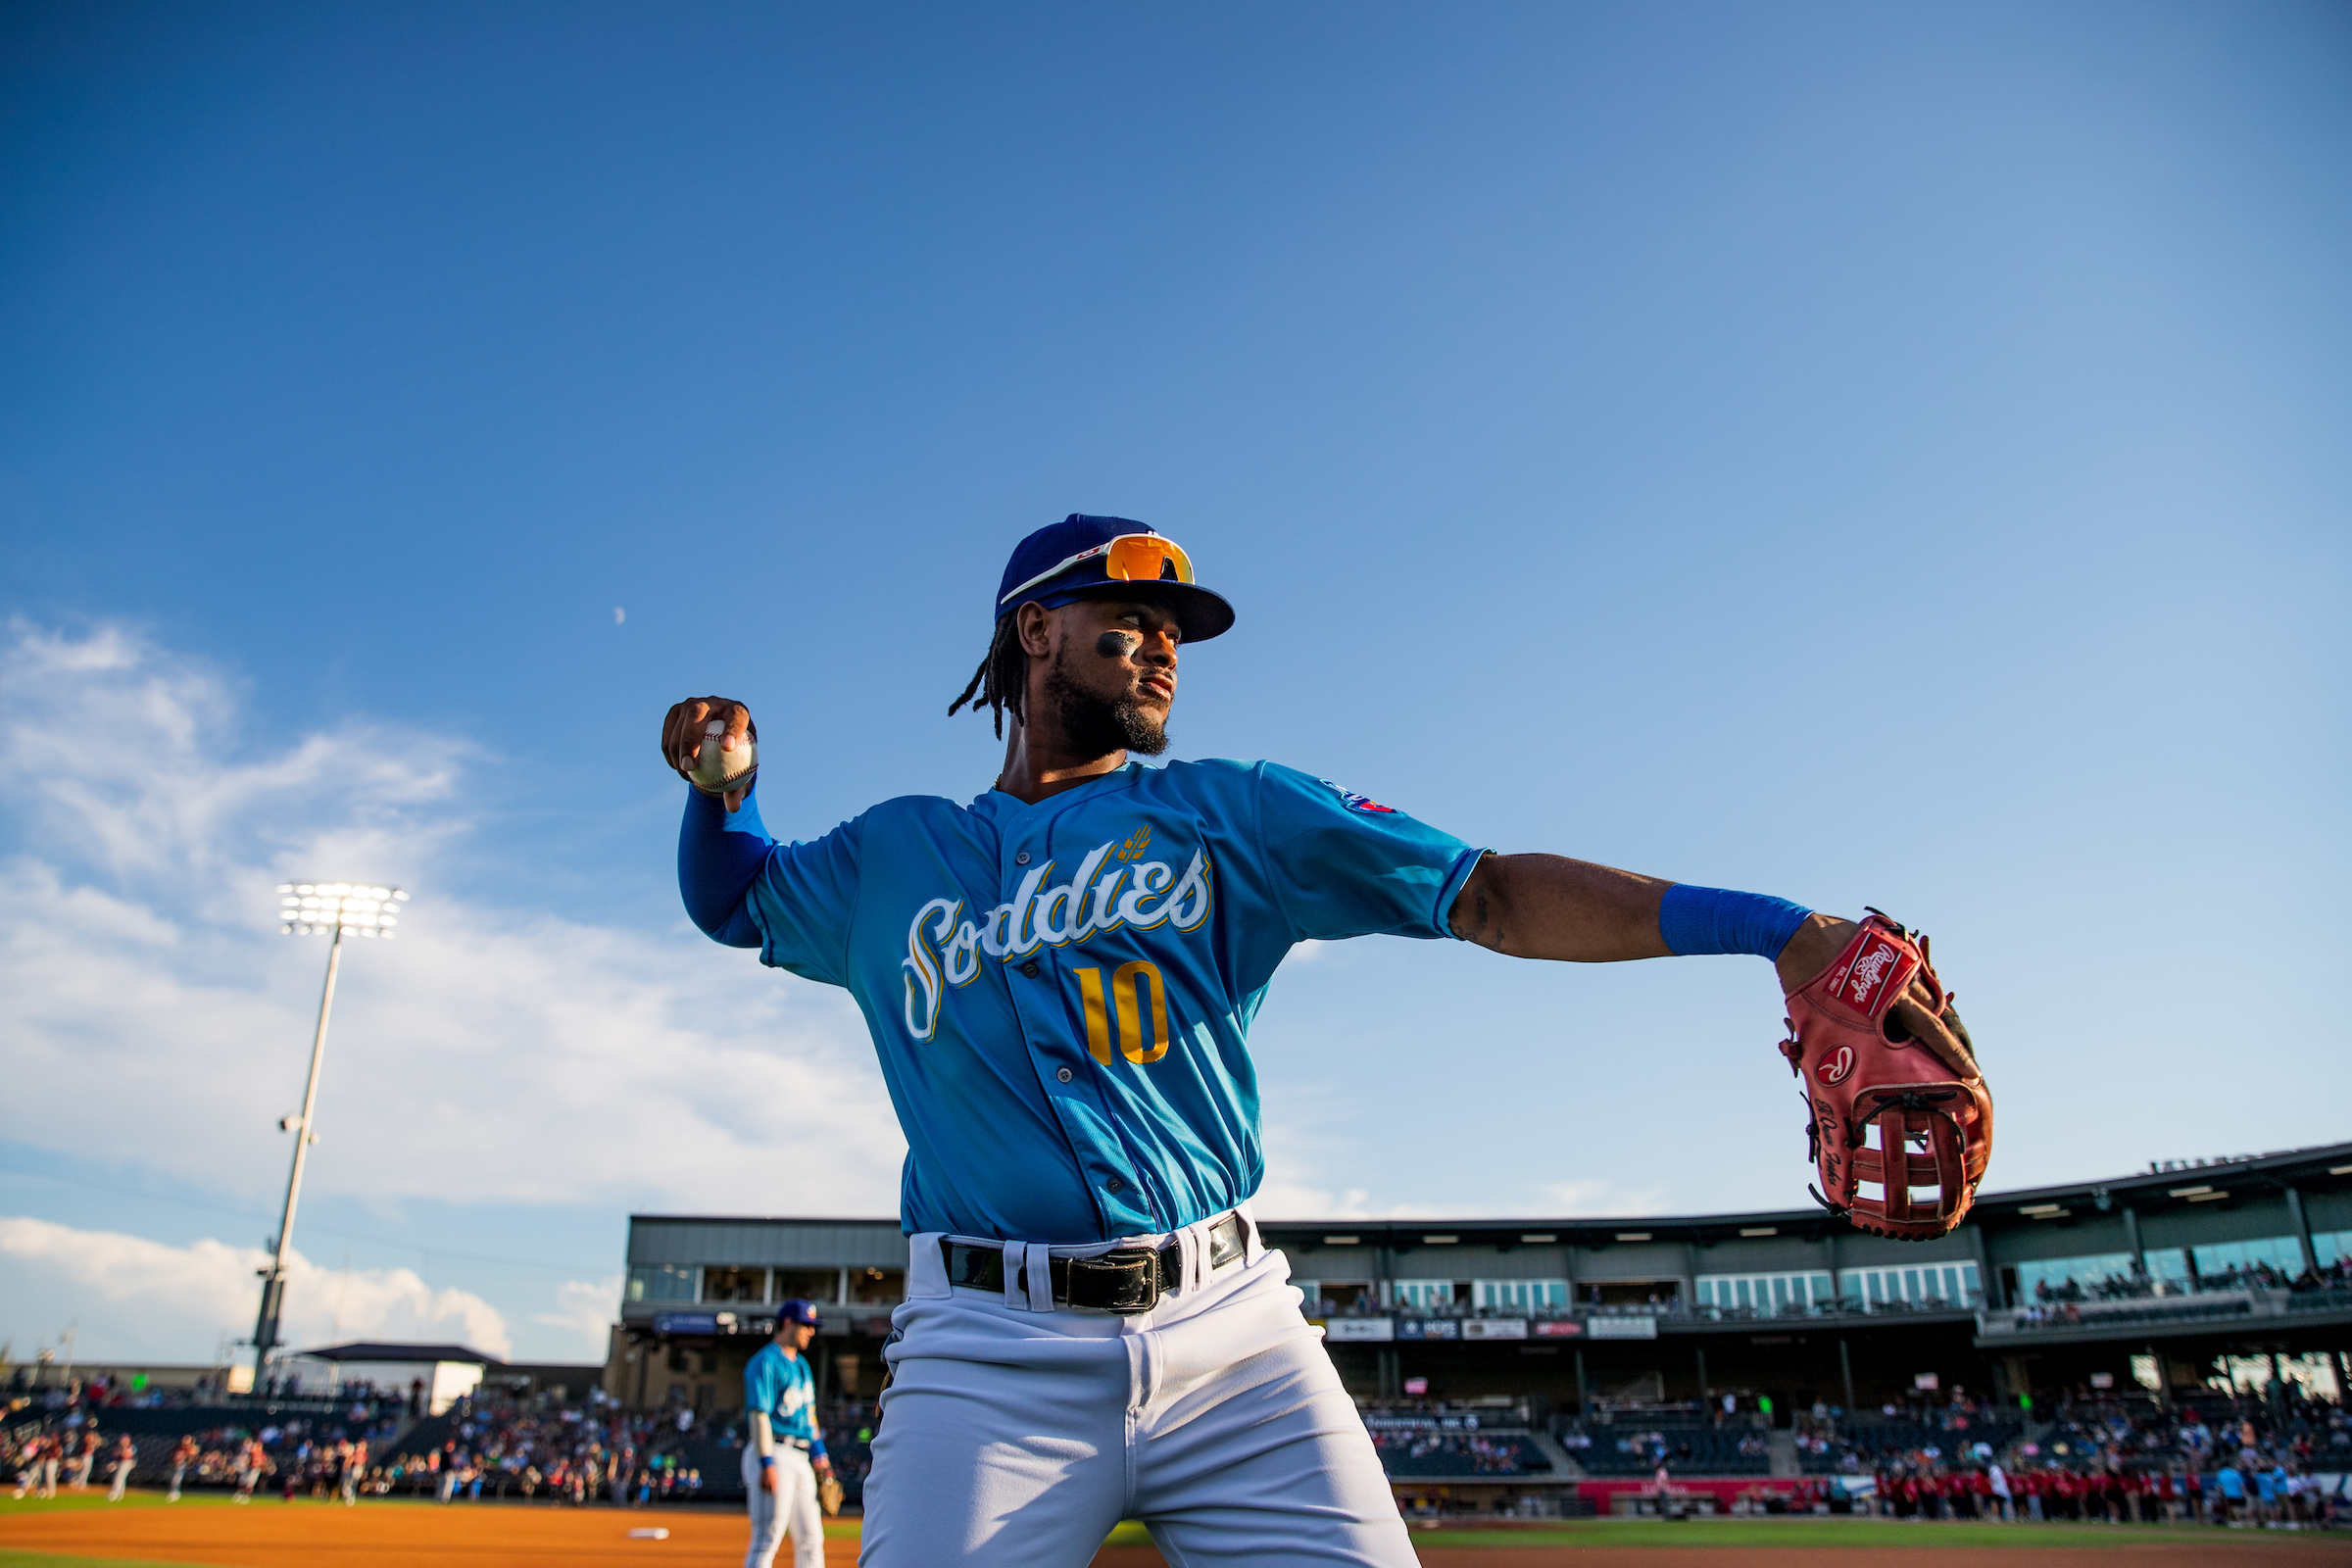 Minor League Baseball Players Are Unionized for the First Time in